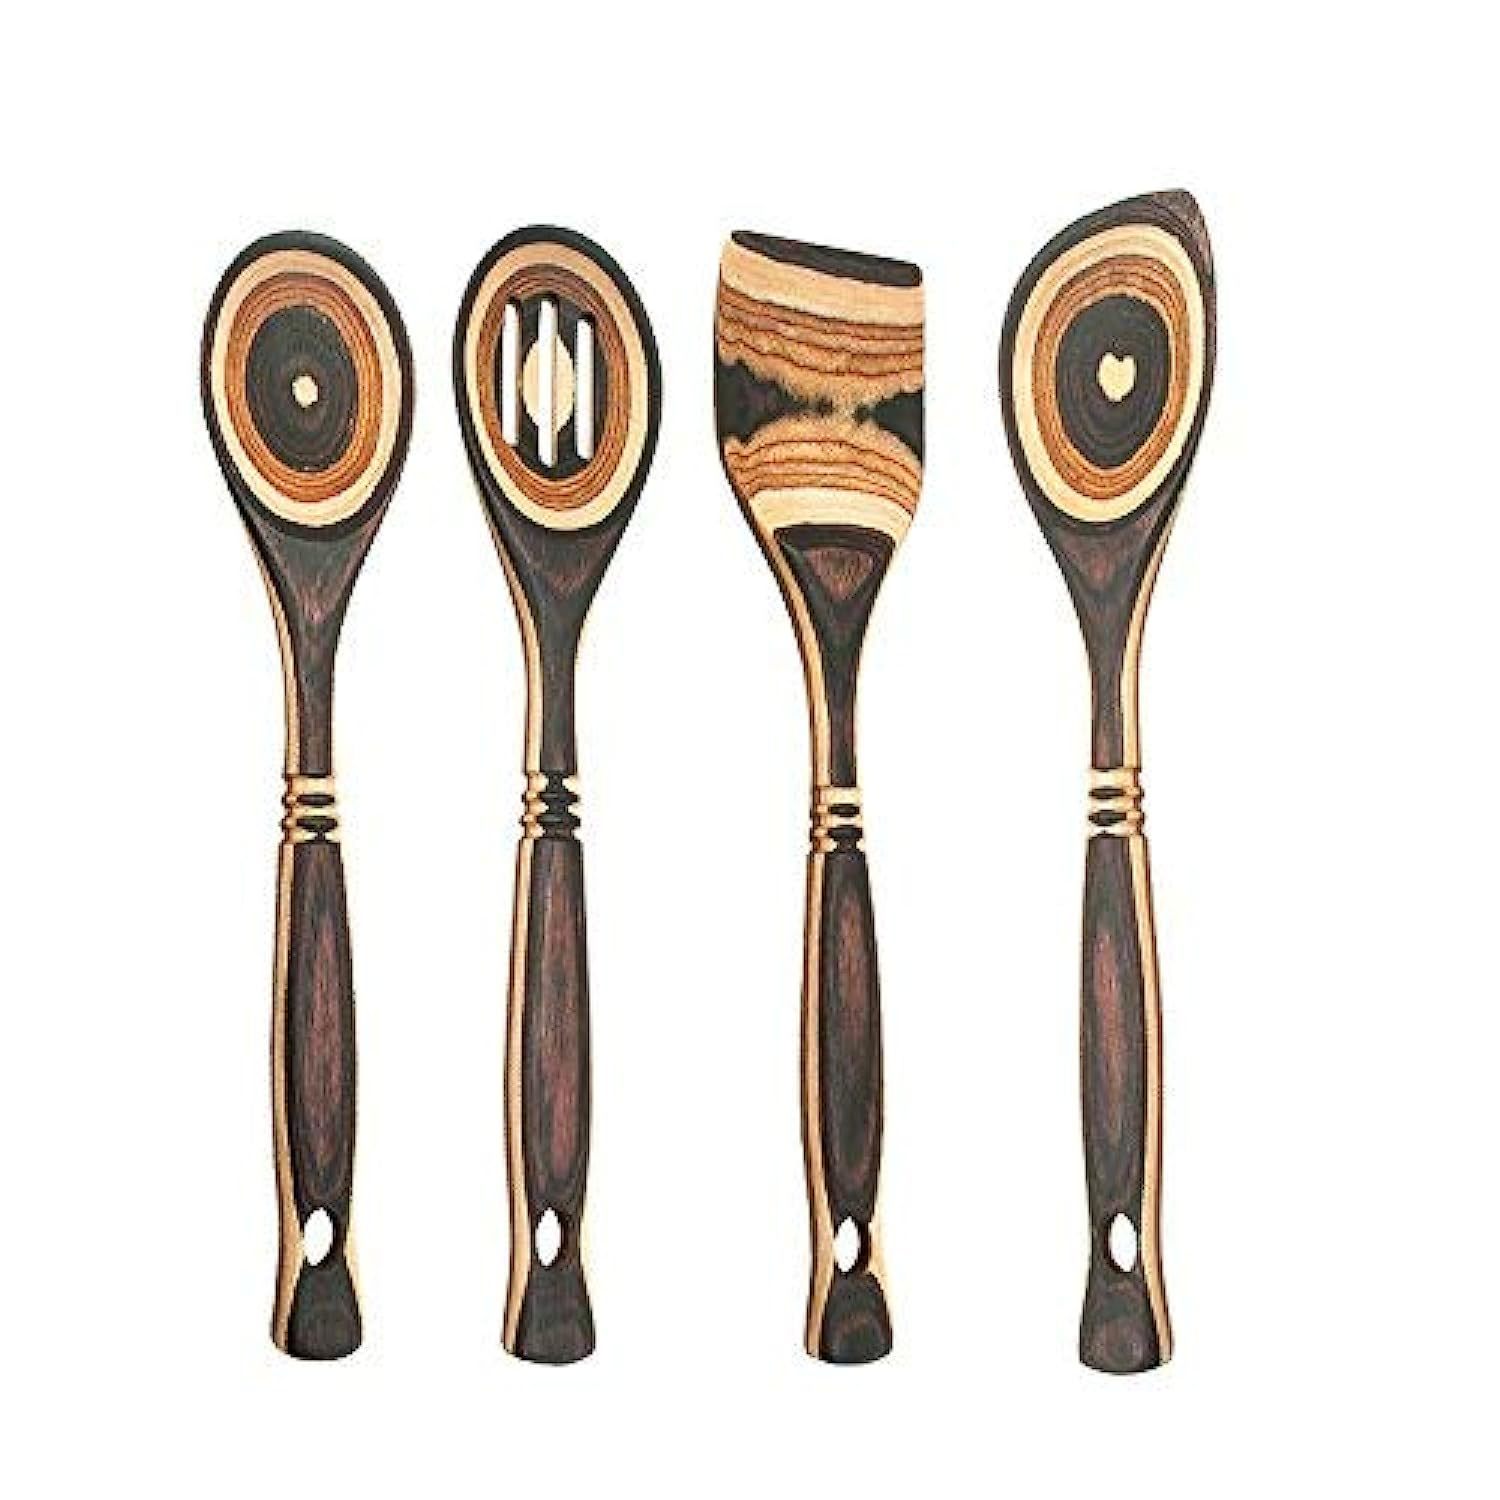 Primary image for Natural Pakkawood 12" Wooden Spoon Set Of 4 With Standard Spoon, Slotted Spoon, 